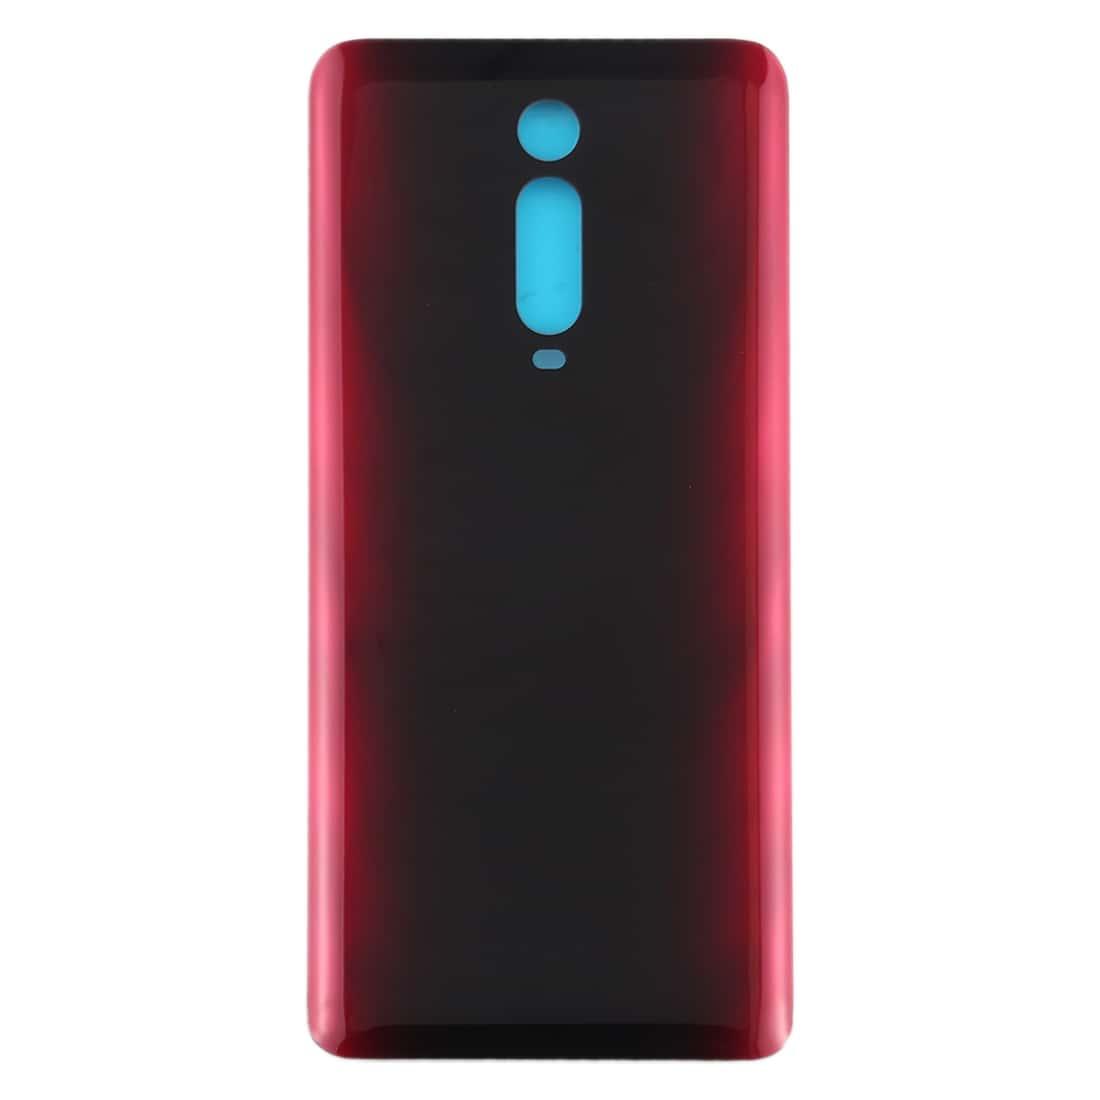 Back Glass Panel for  Xiaomi Redmi K20 or K20 Pro Red